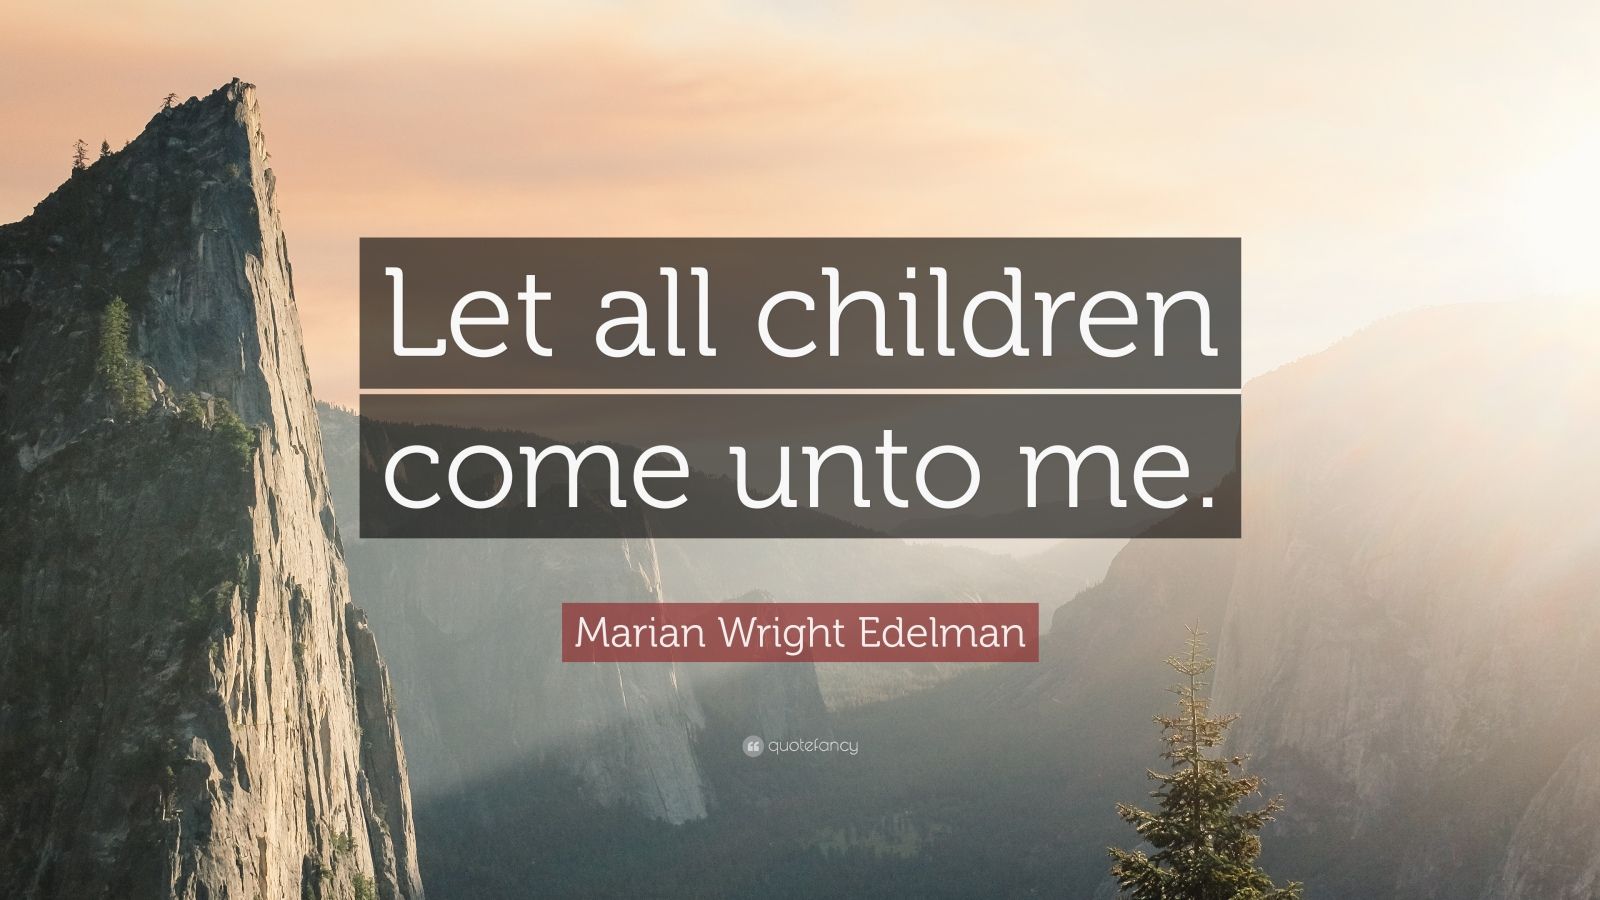 Marian Wright Edelman Quote: "Let all children come unto me." (7 wallpapers) - Quotefancy